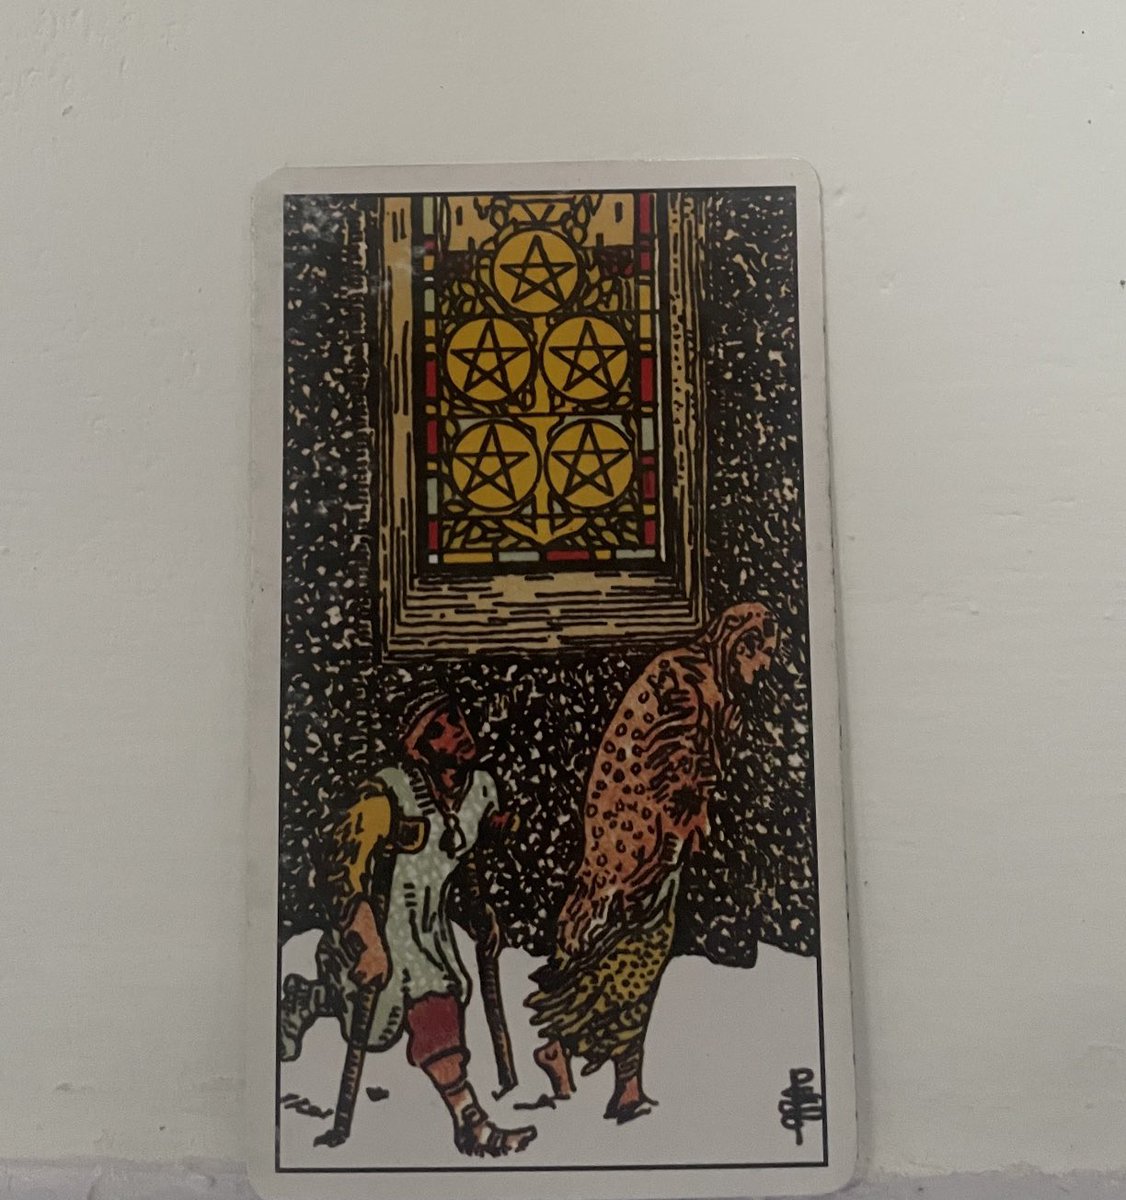 Card of the day: Five of Pentacles 

Difficulties abound, especially related to health and finances, but know that this too shall pass. Hang in there. 

#tarot #cardoftheday